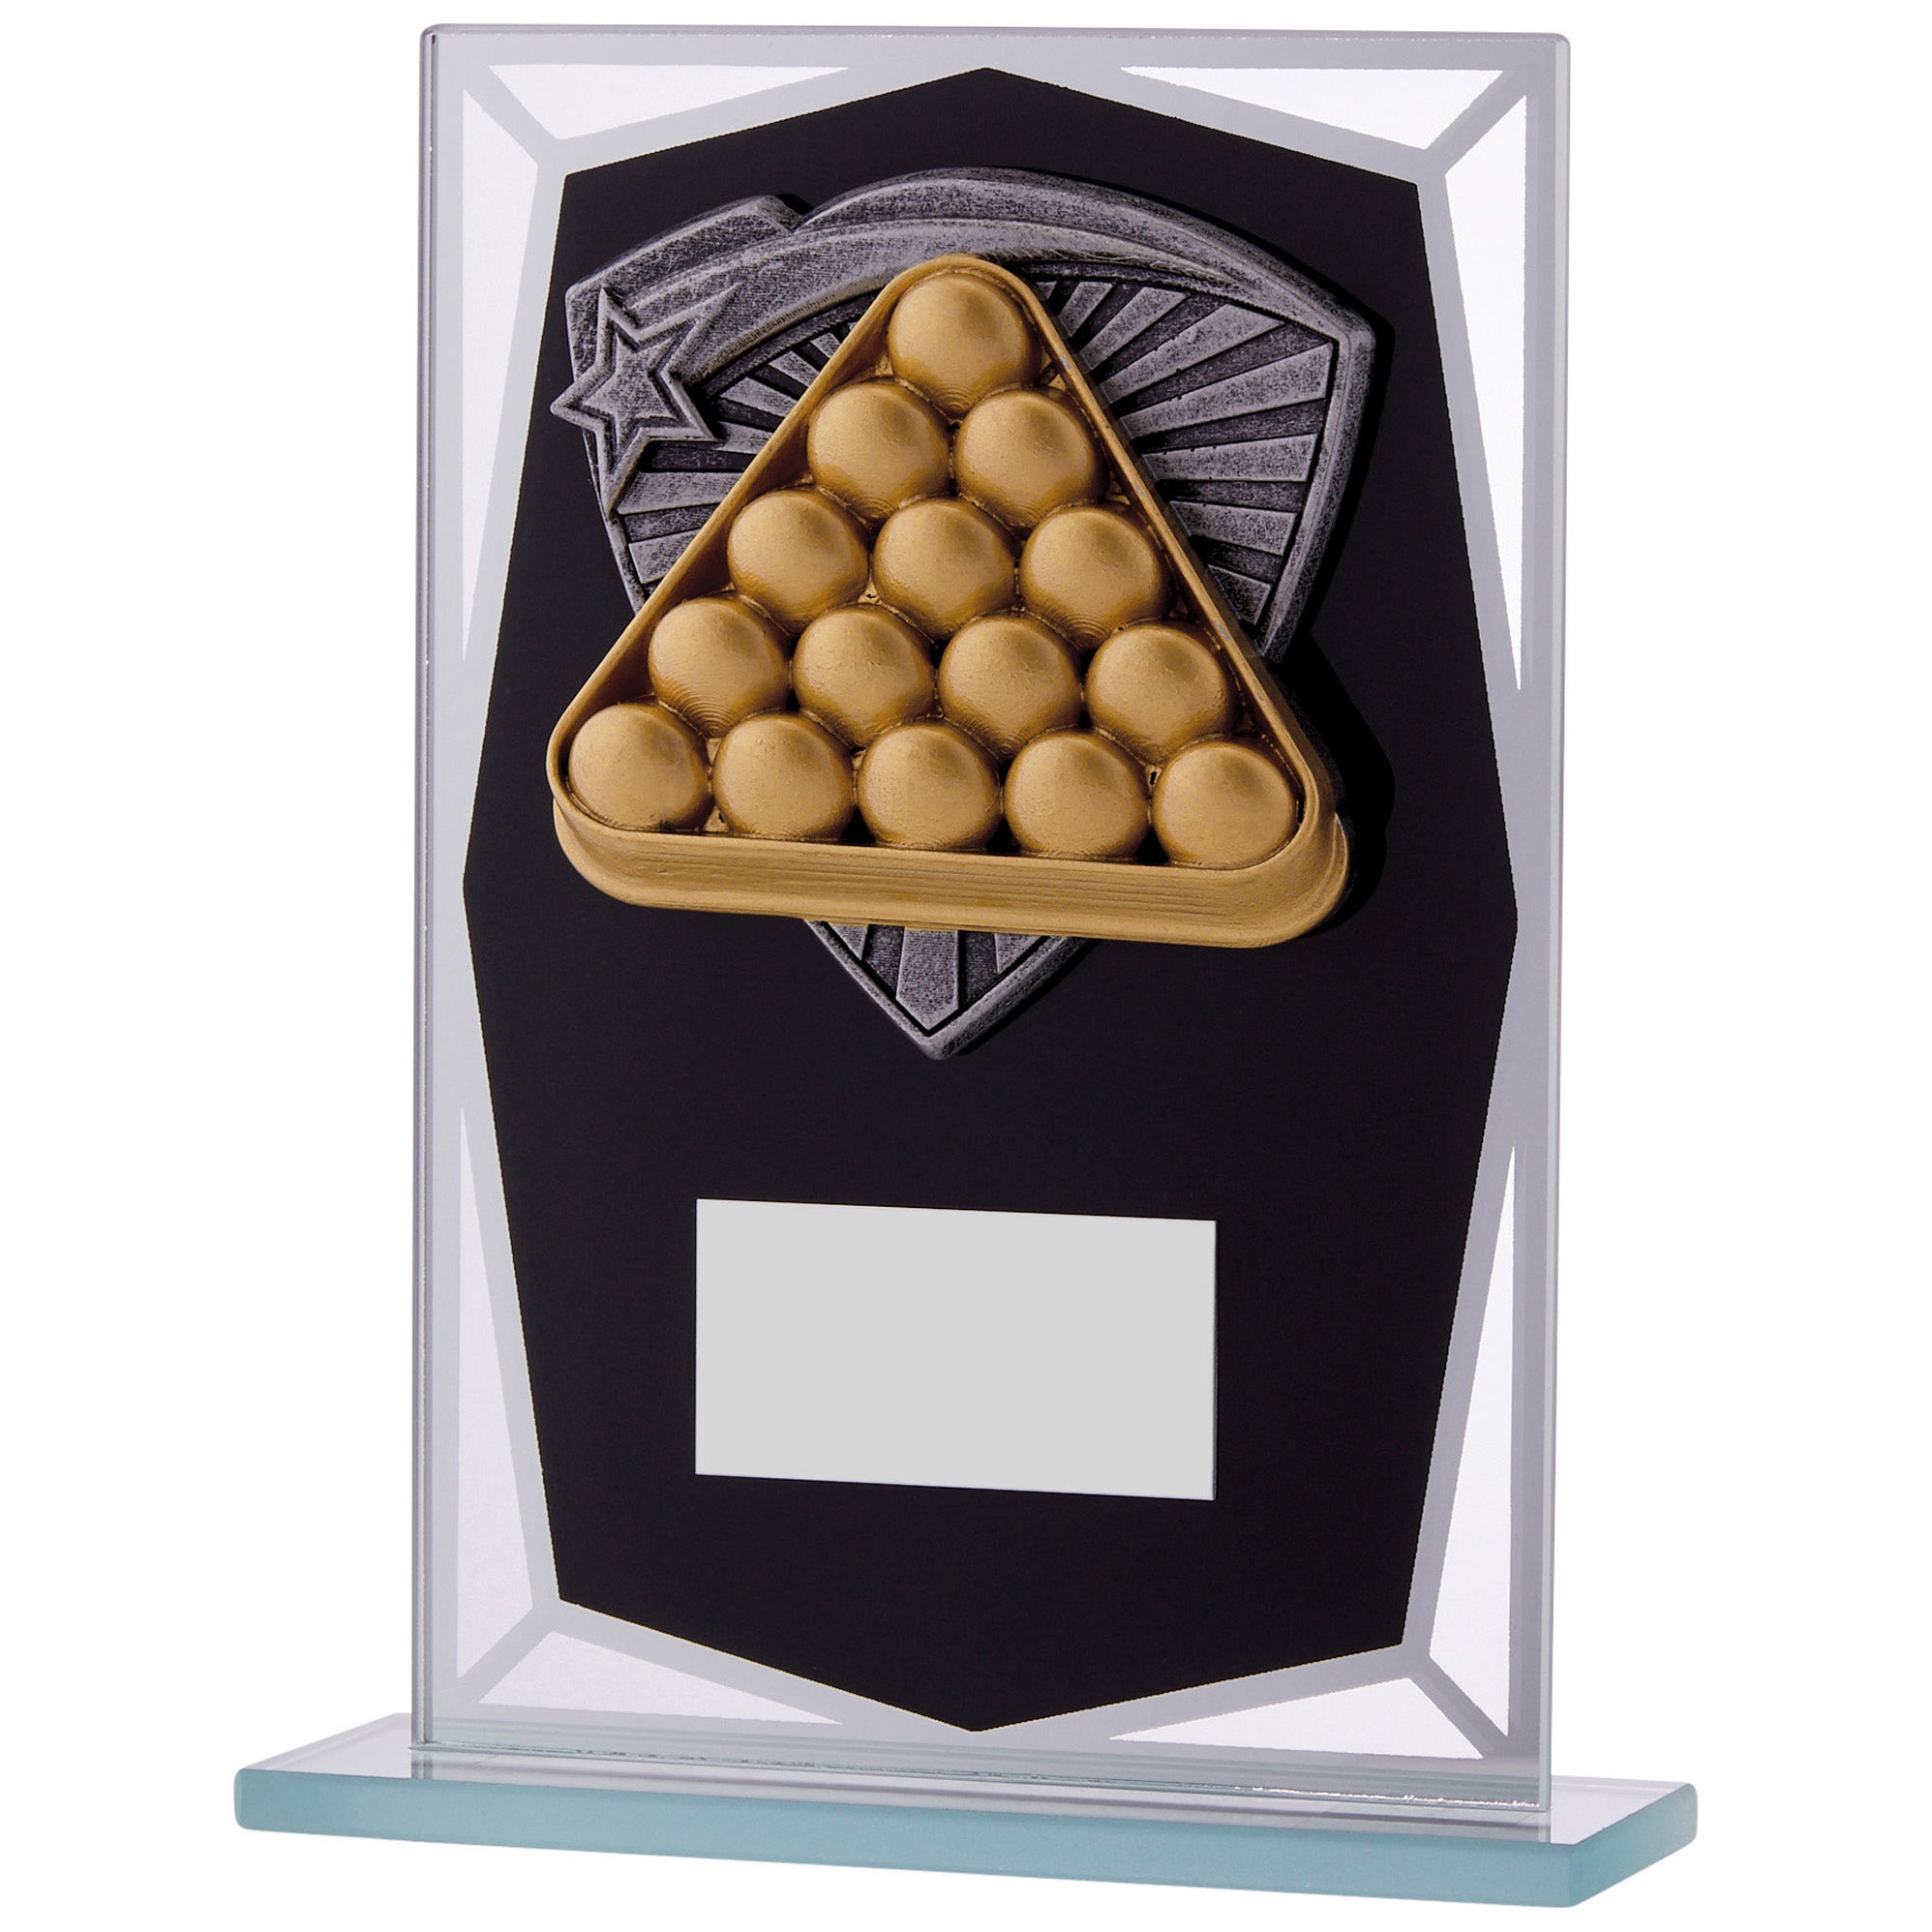 Snooker/Pool Glass Award with Personalised Plaque